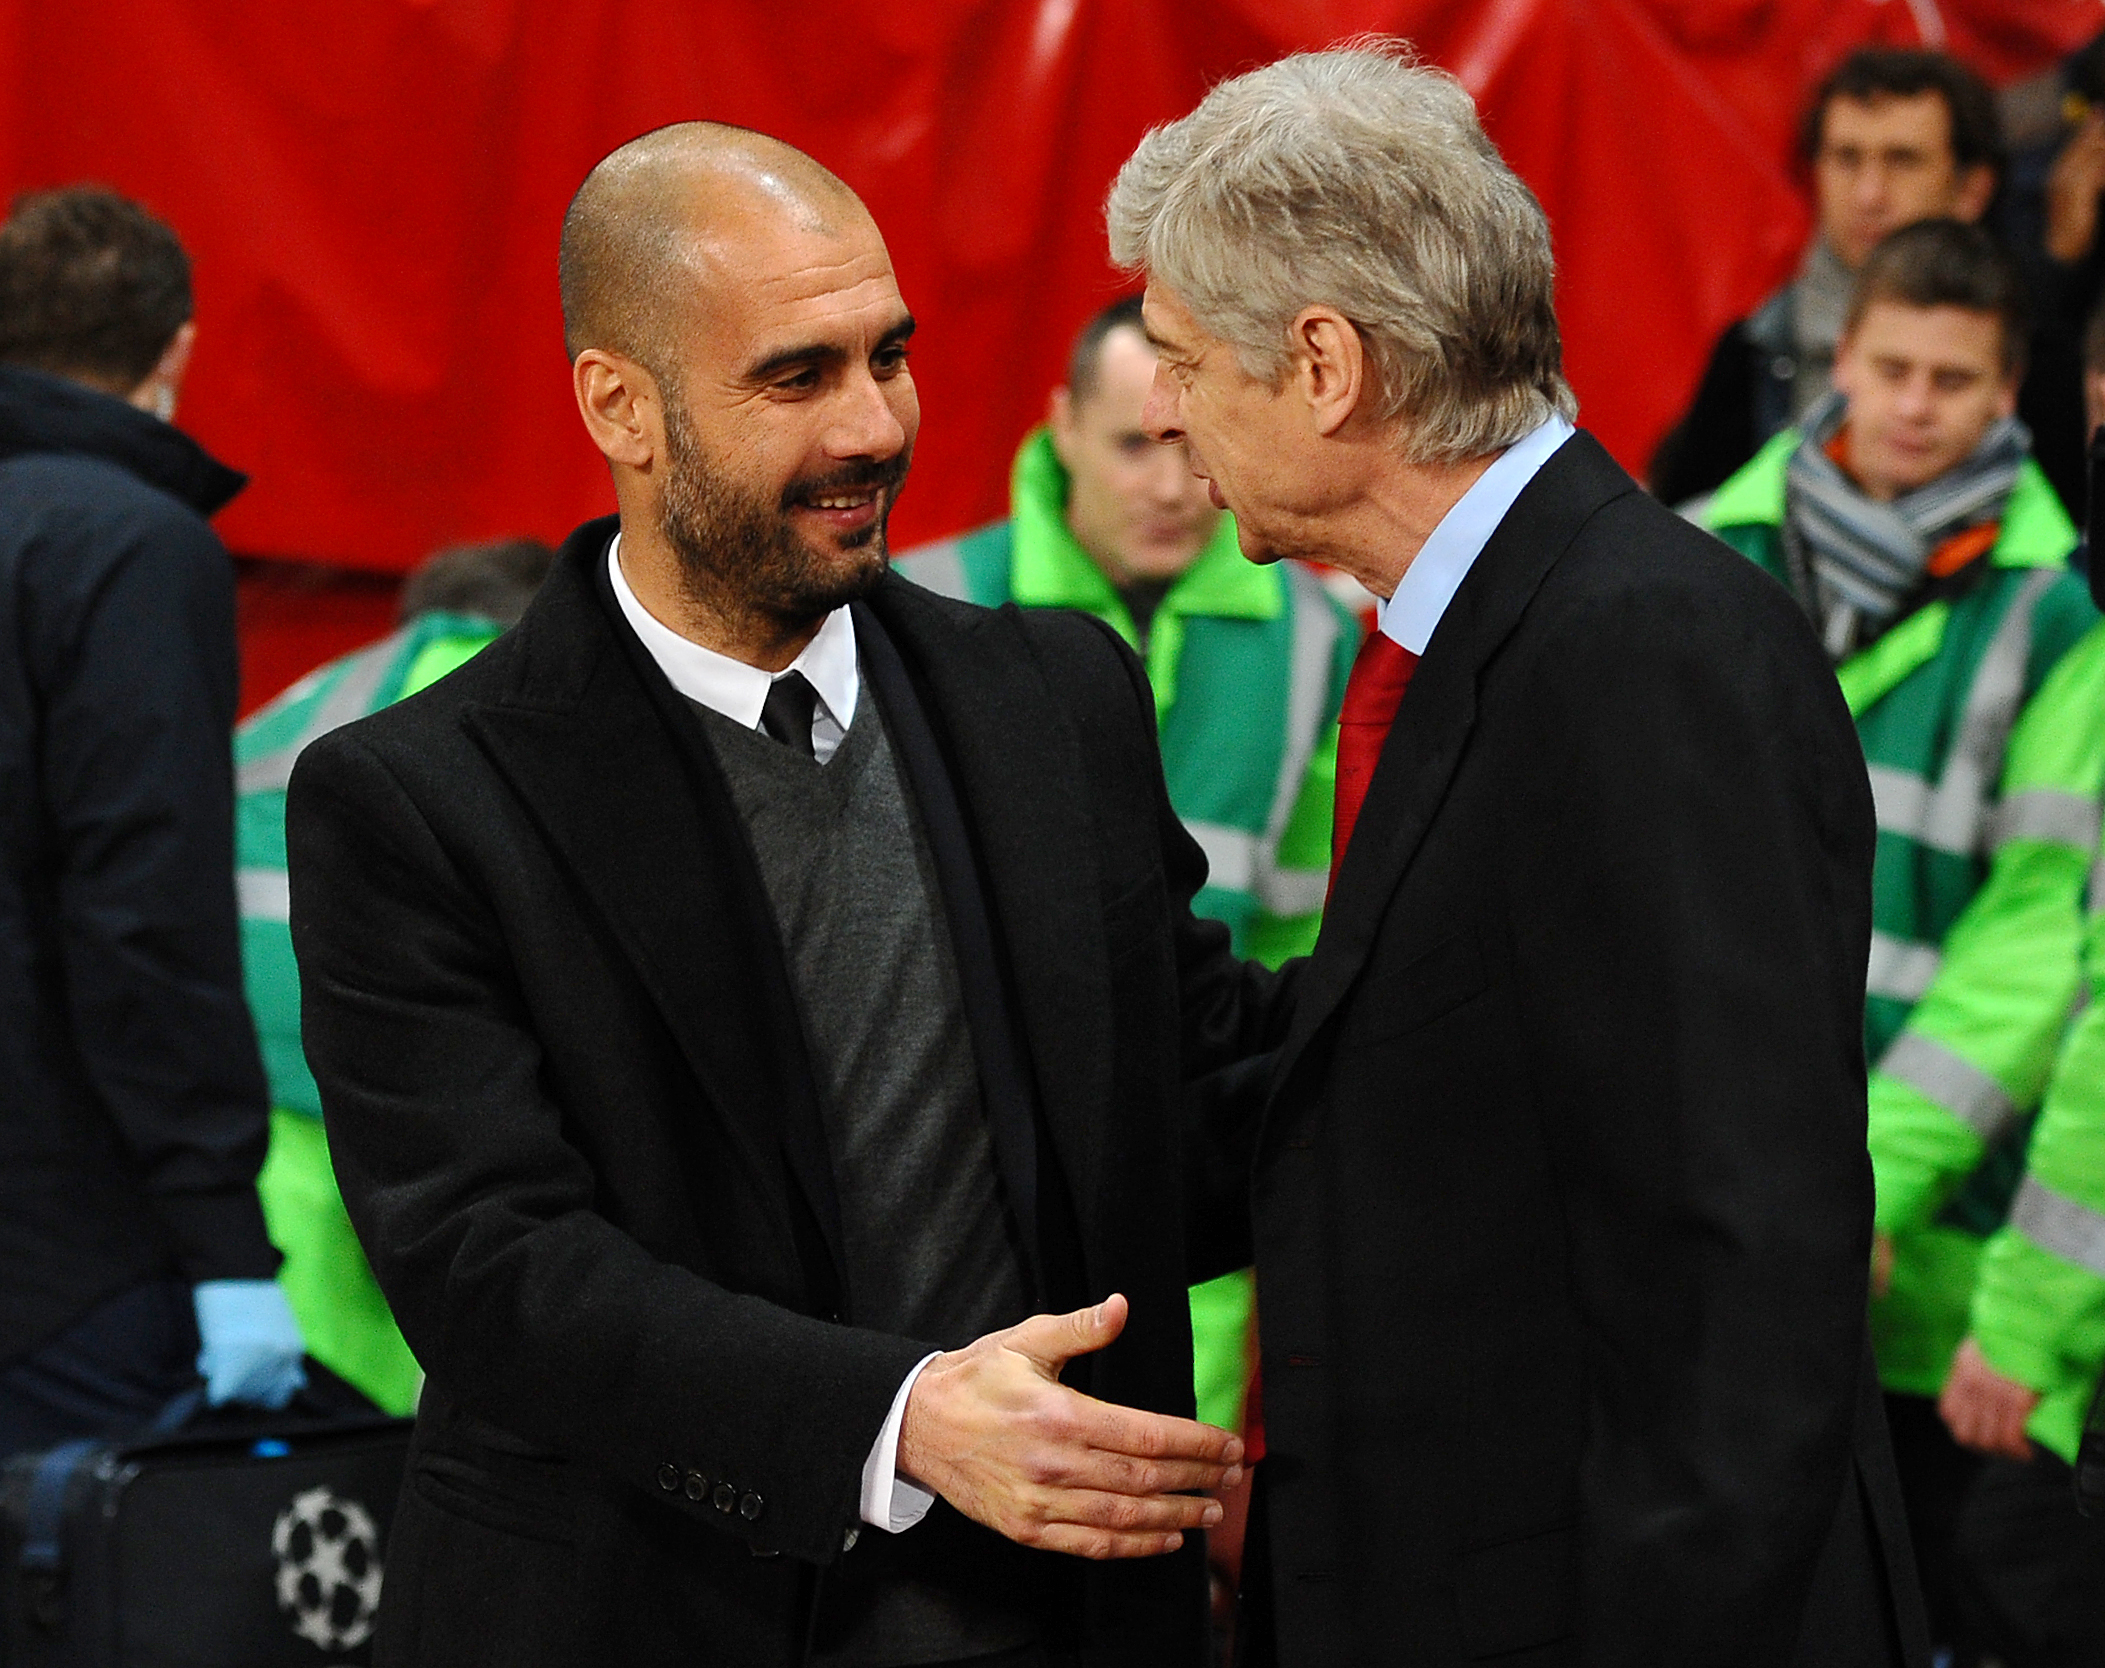 Arsenal's French coach Ars?ne Wenger (R) welcomes to Barcelona's coach Pep Guardiola (L) before their Champions League round of 16, 1st leg football match Arsenal vs FC Barcelona on February 16, 2011 at the Emirates Stadium in London. AFP PHOTO/LLUIS GENE. (Photo credit should read LLUIS GENE/AFP/Getty Images)